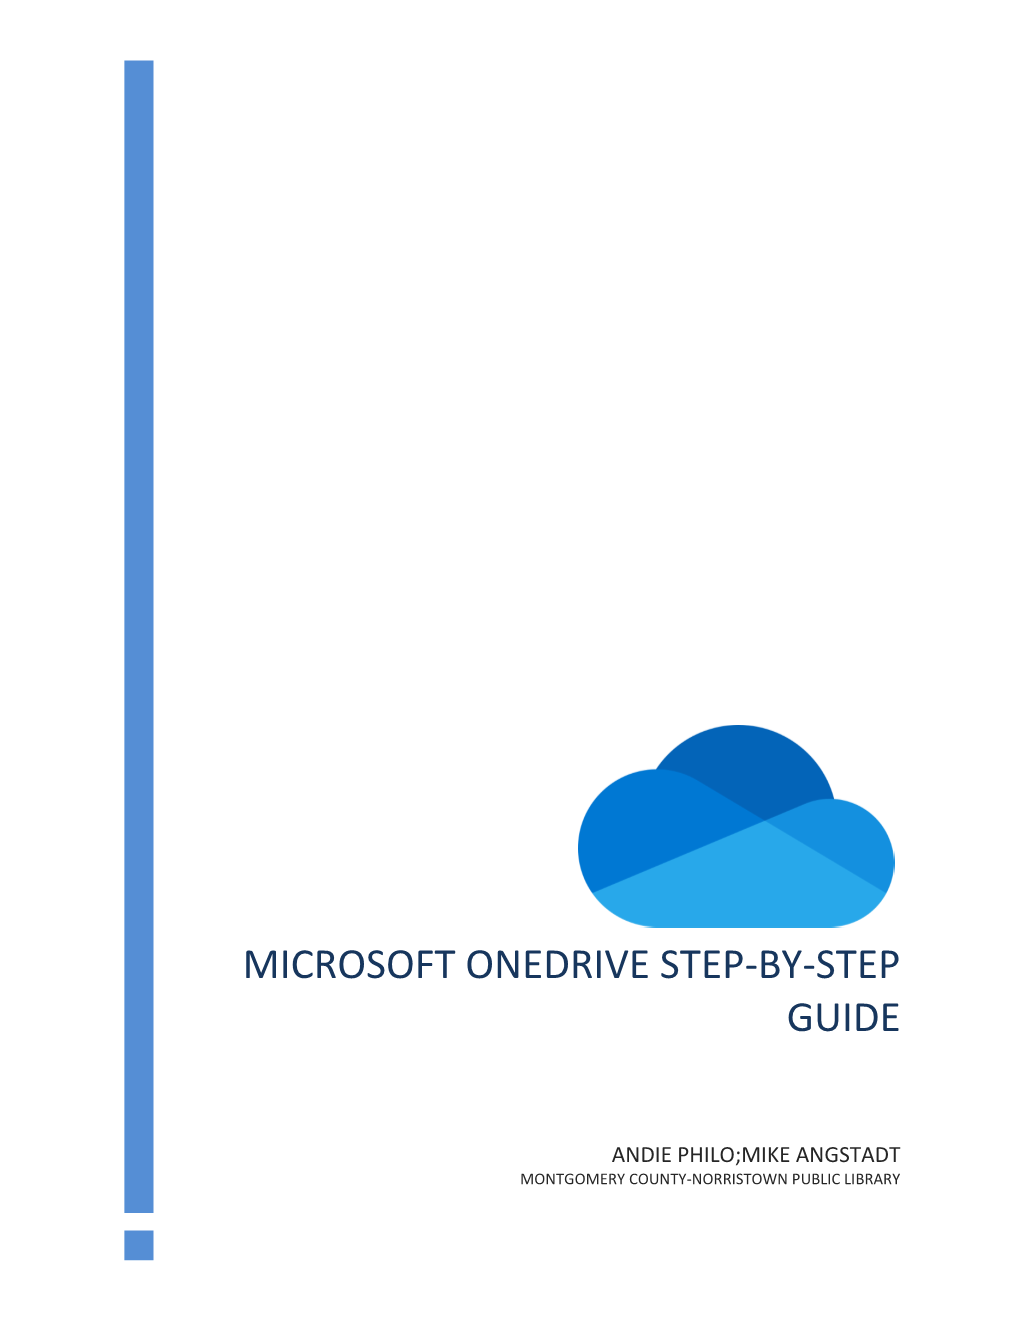 Microsoft Onedrive Step-By-Step Guide